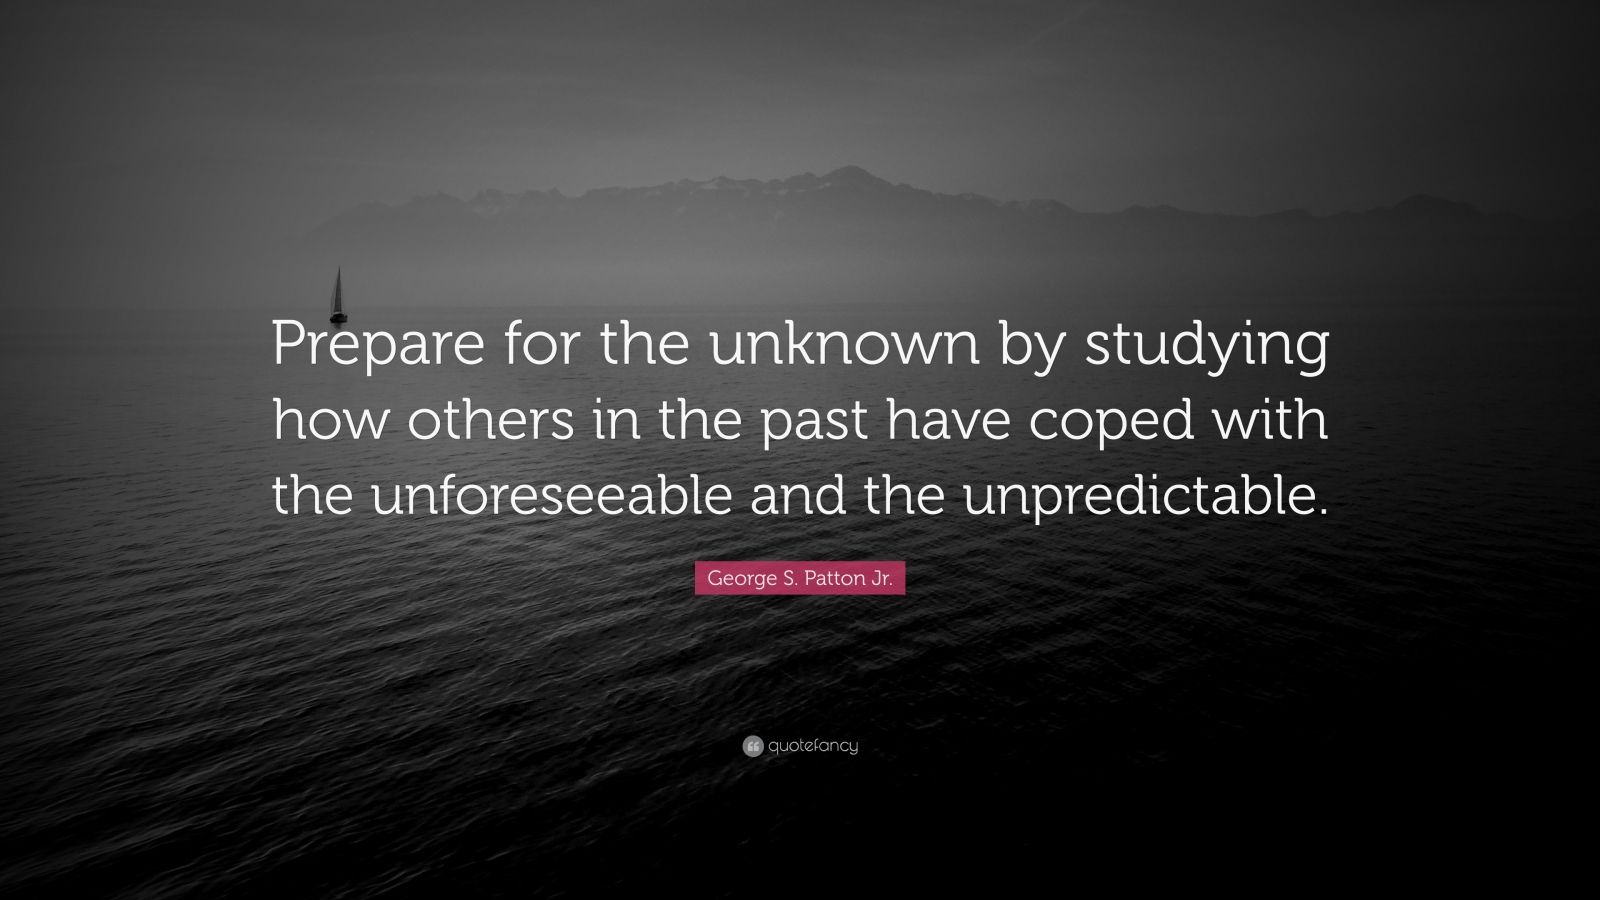 George S. Patton Jr. Quote: “Prepare for the unknown by studying how ...